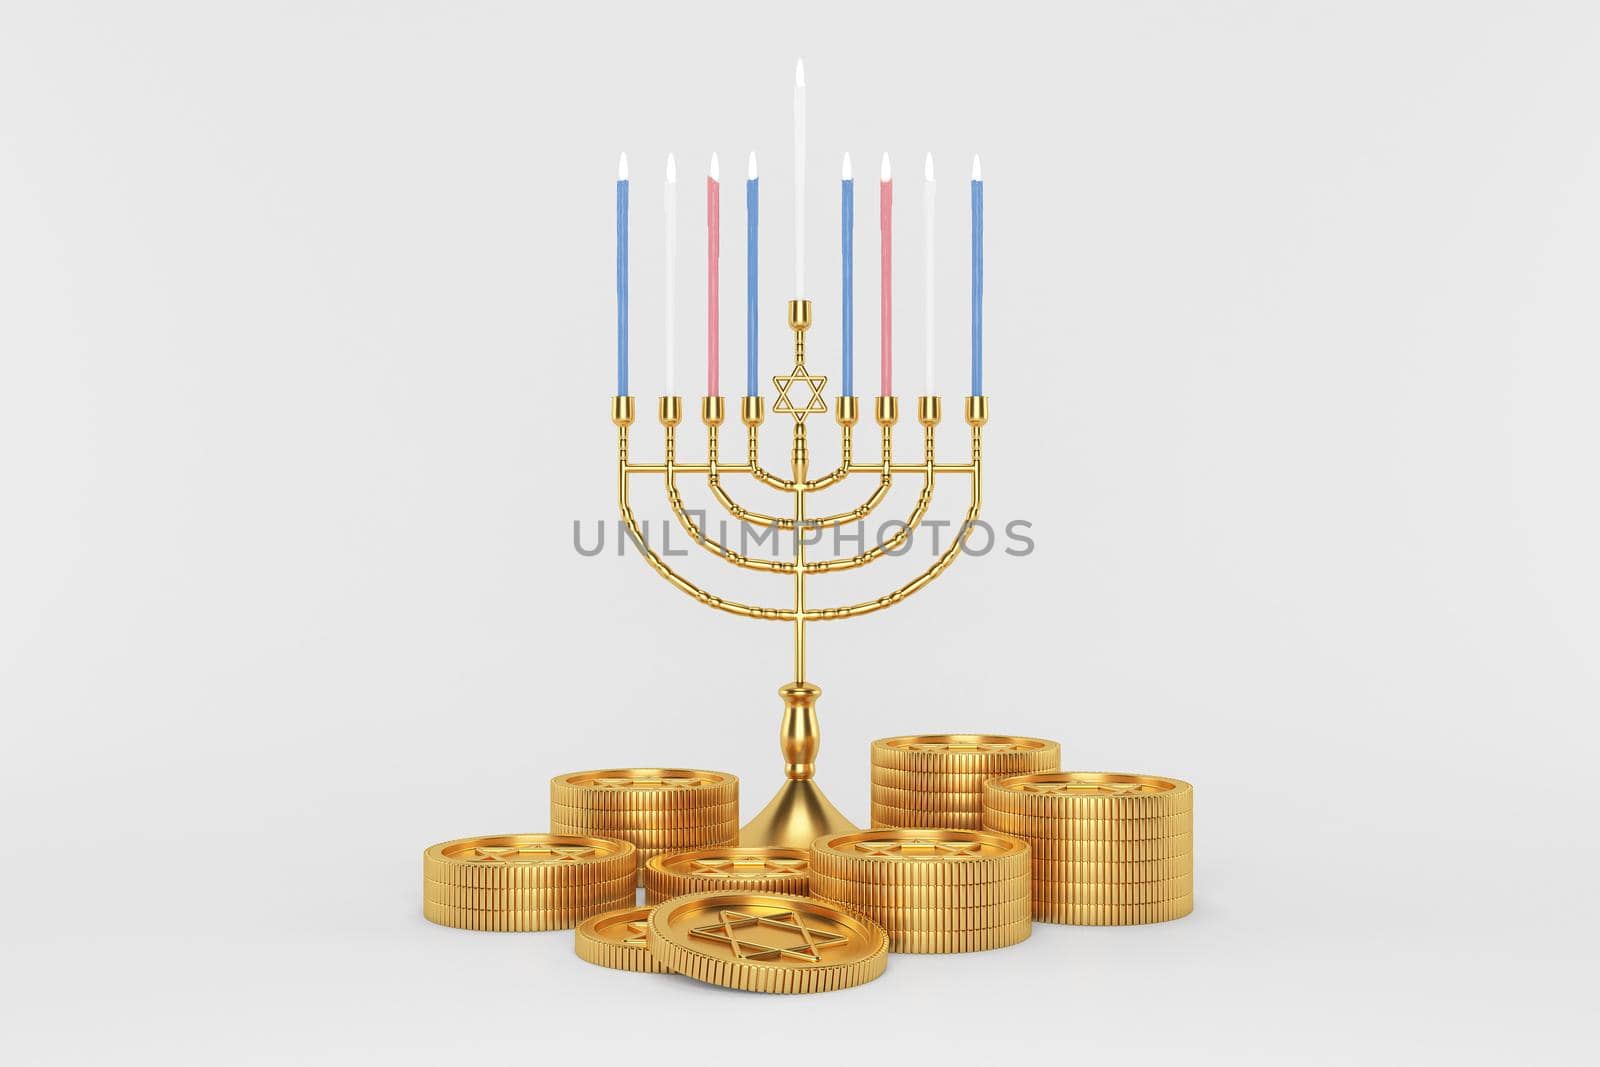 3d rendering Image of Jewish holiday Hanukkah with menorah or traditional Candelabra, and gold coin  on a  white background.